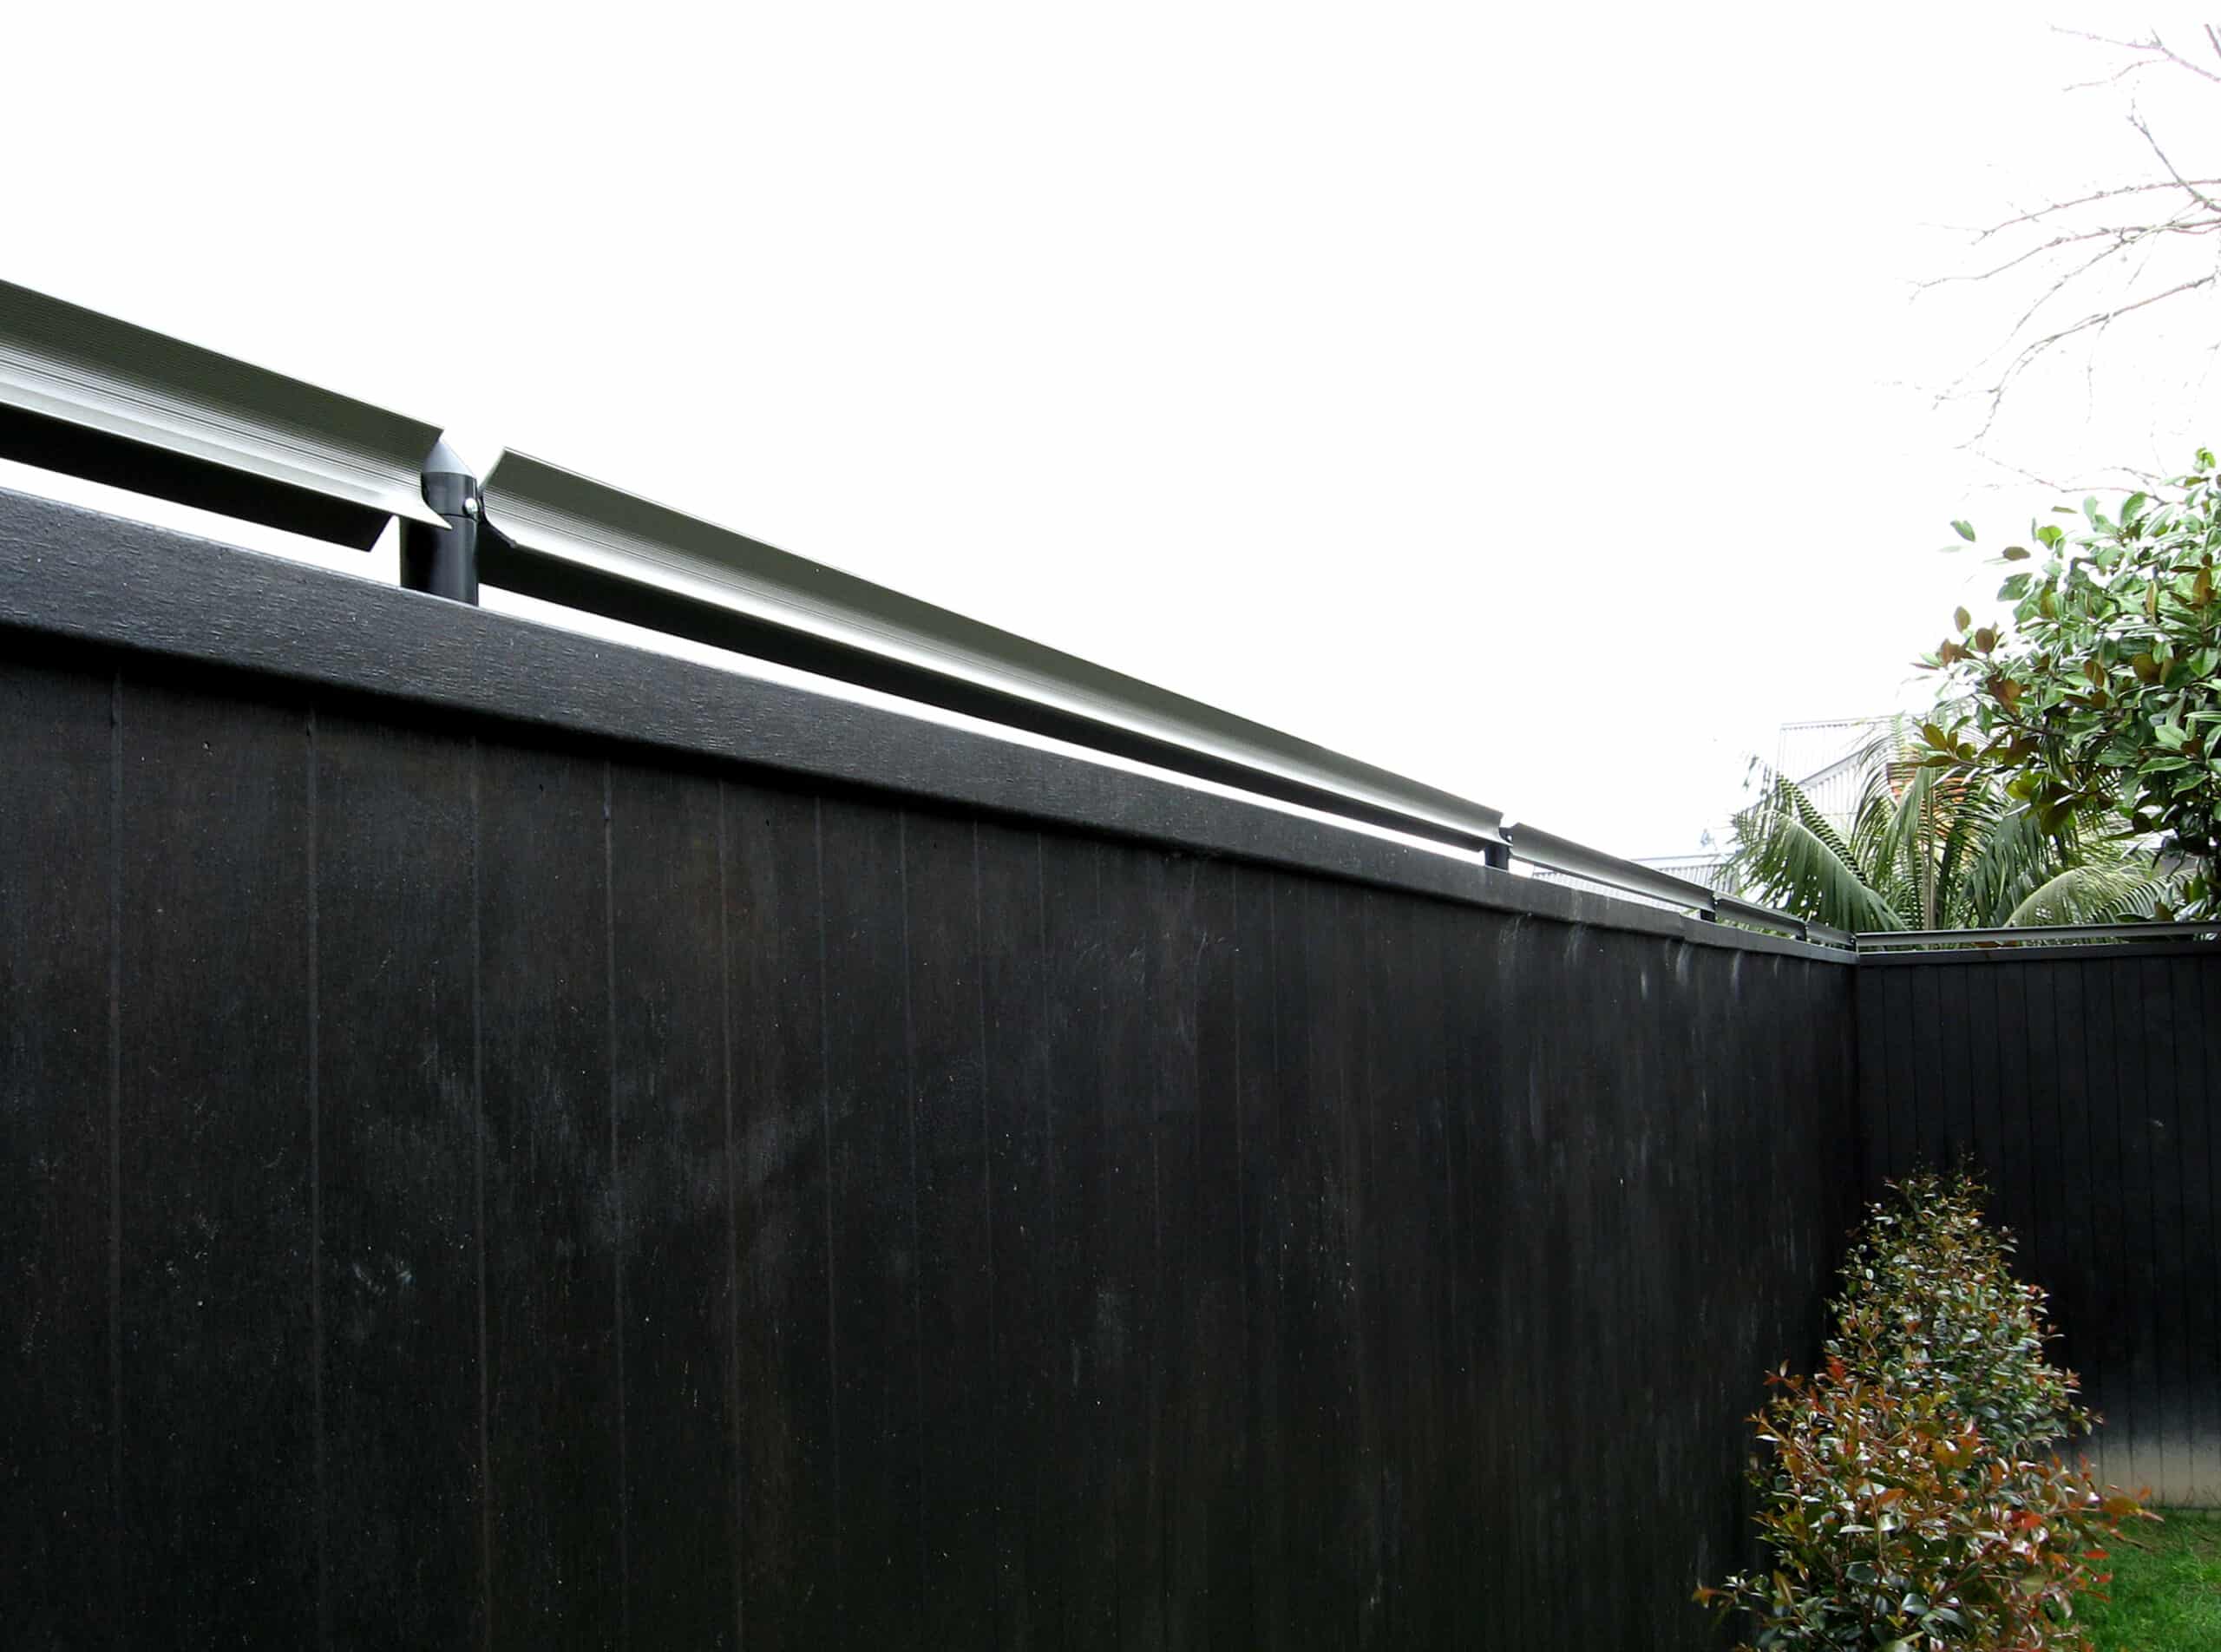 Oscillot cat fence system on top of timber fence